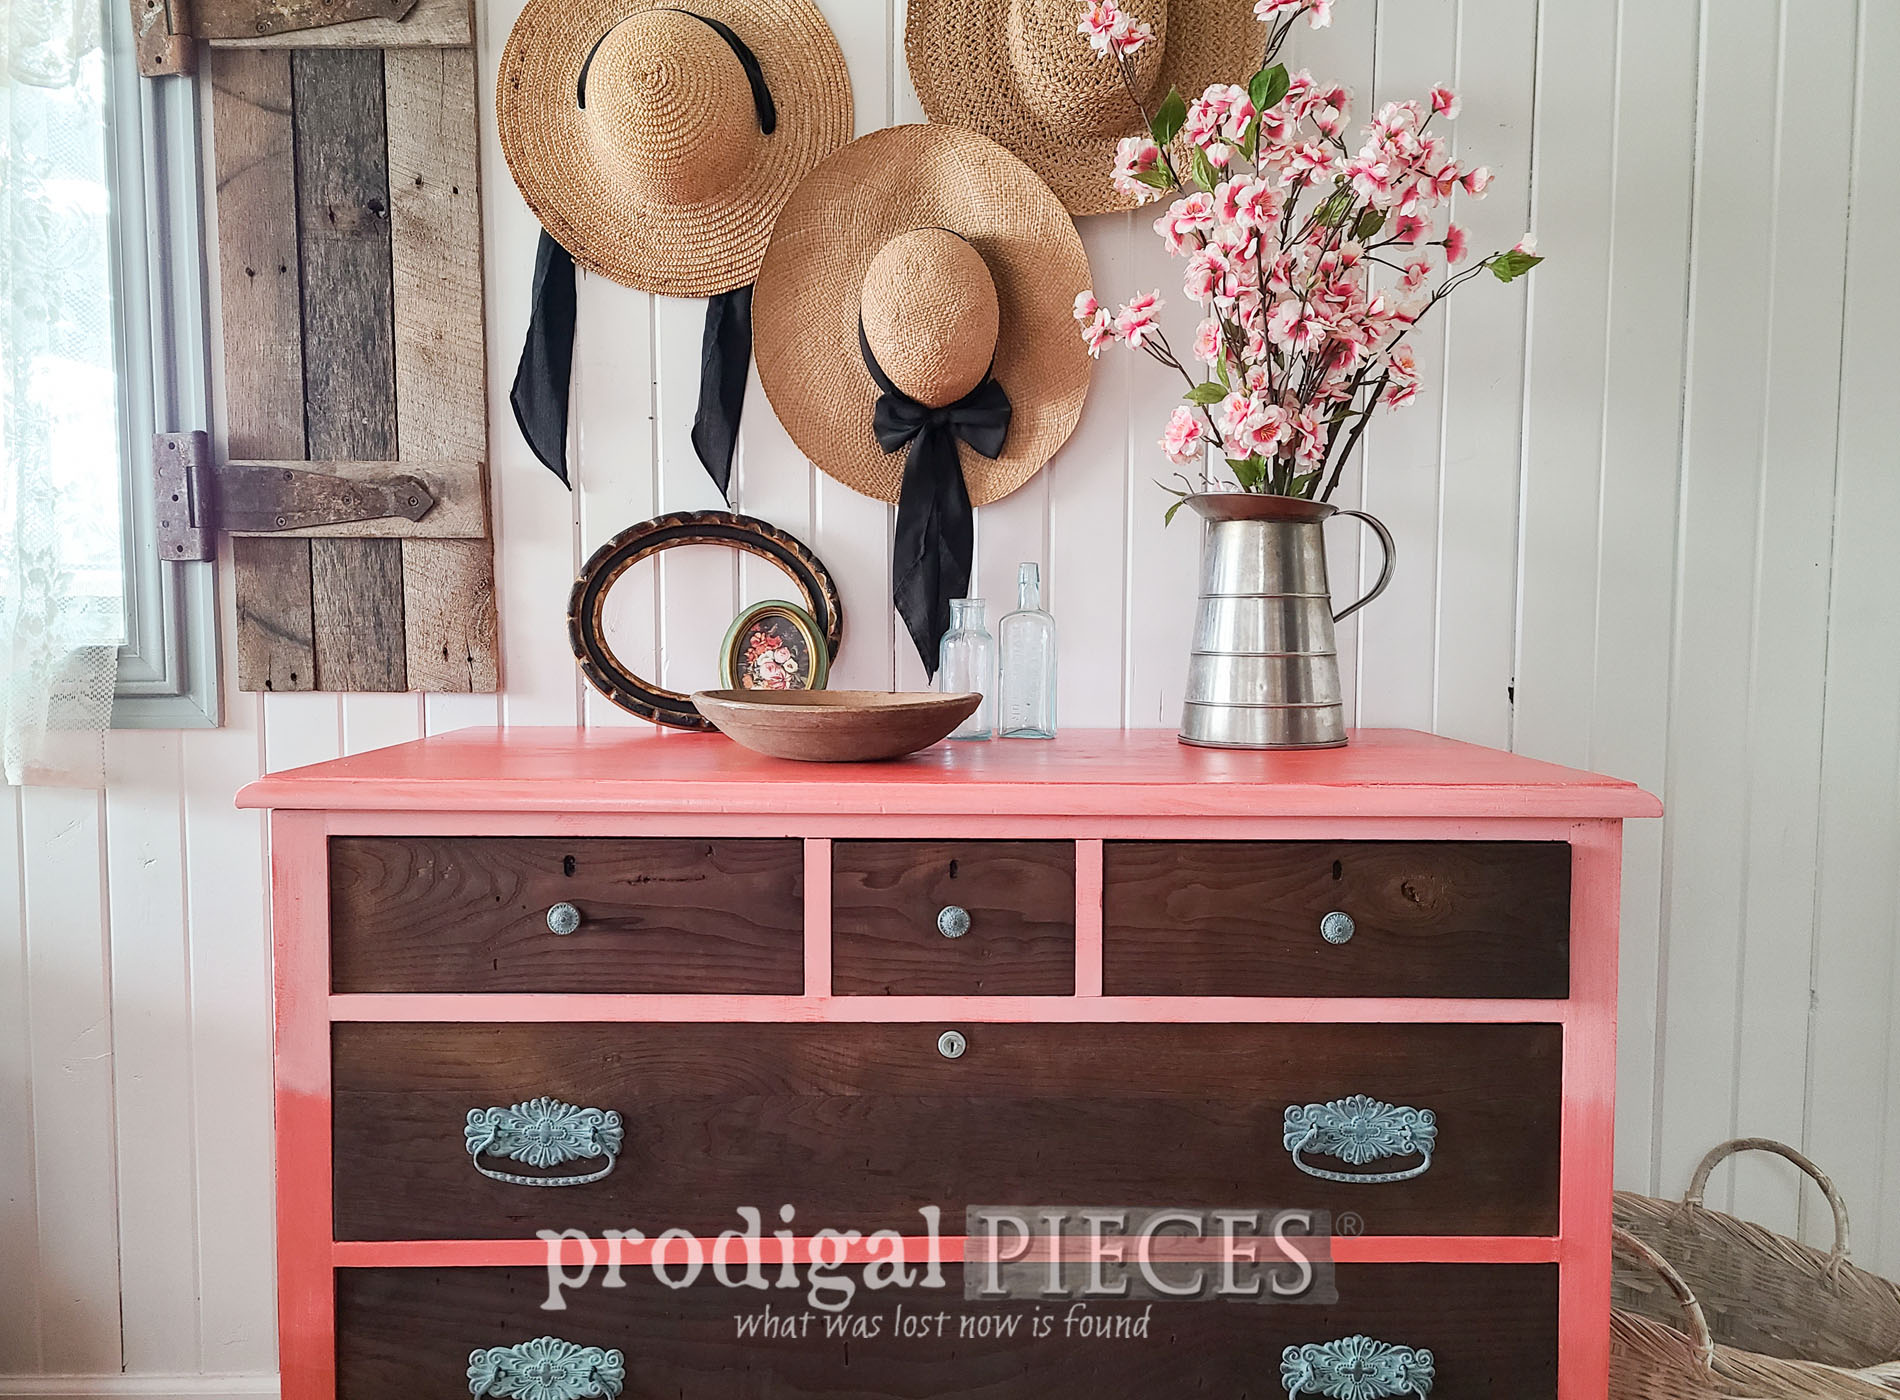 Featured Damaged Antique Dresser Revival with Boho Flair by Larissa of Prodigal Pieces | prodigalpieces.com #prodigalpieces #furniture #diy #boho #thrifted